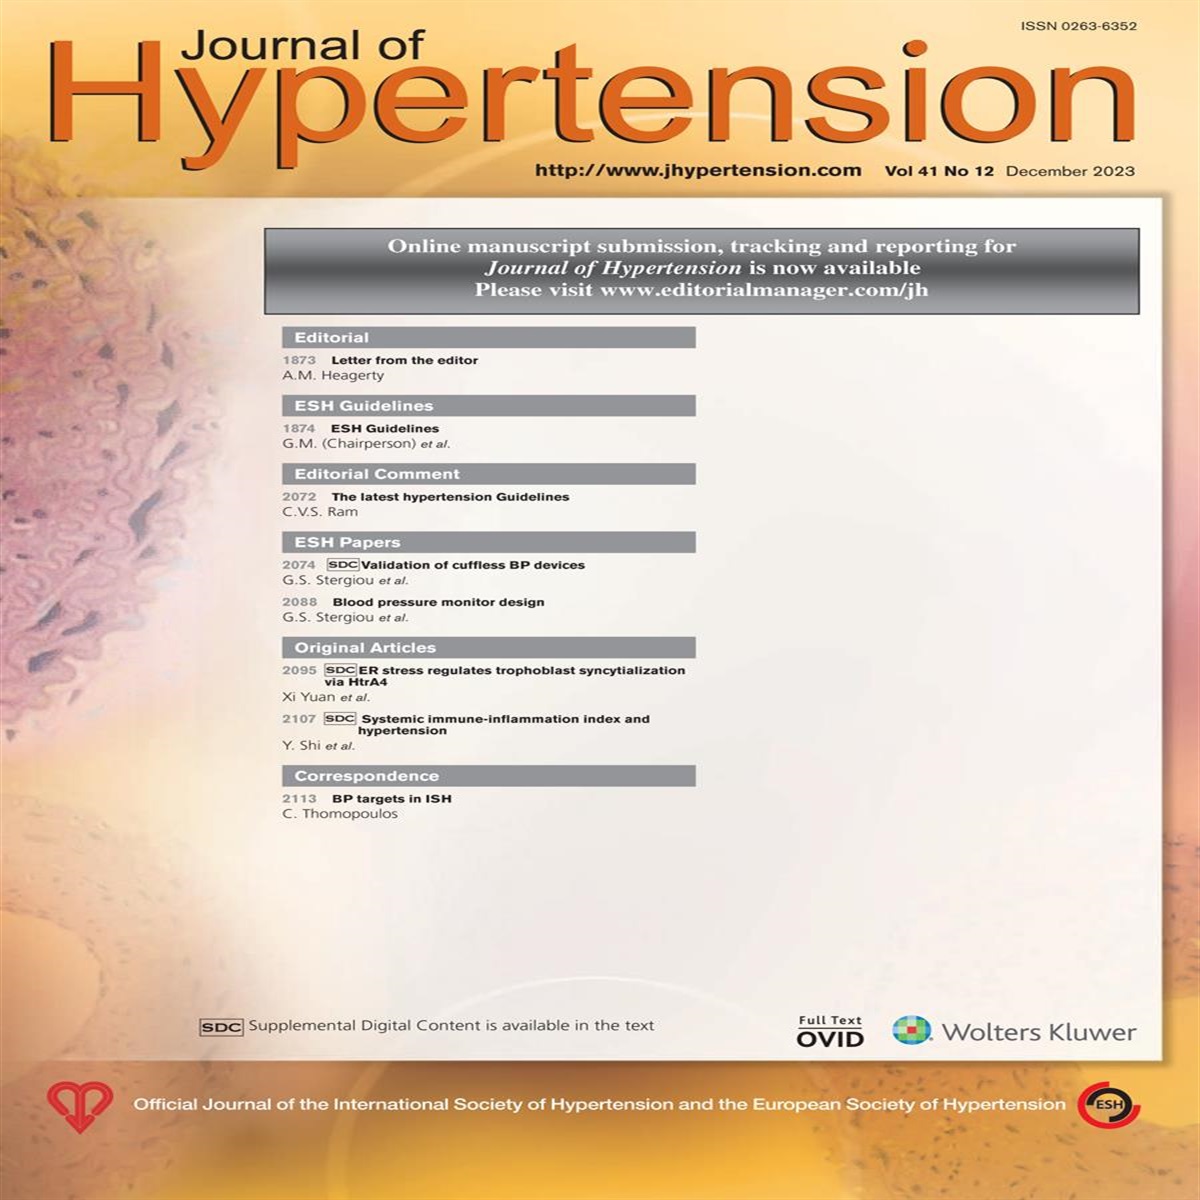 The latest hypertension guidelines: from encryption to decryption, finally!